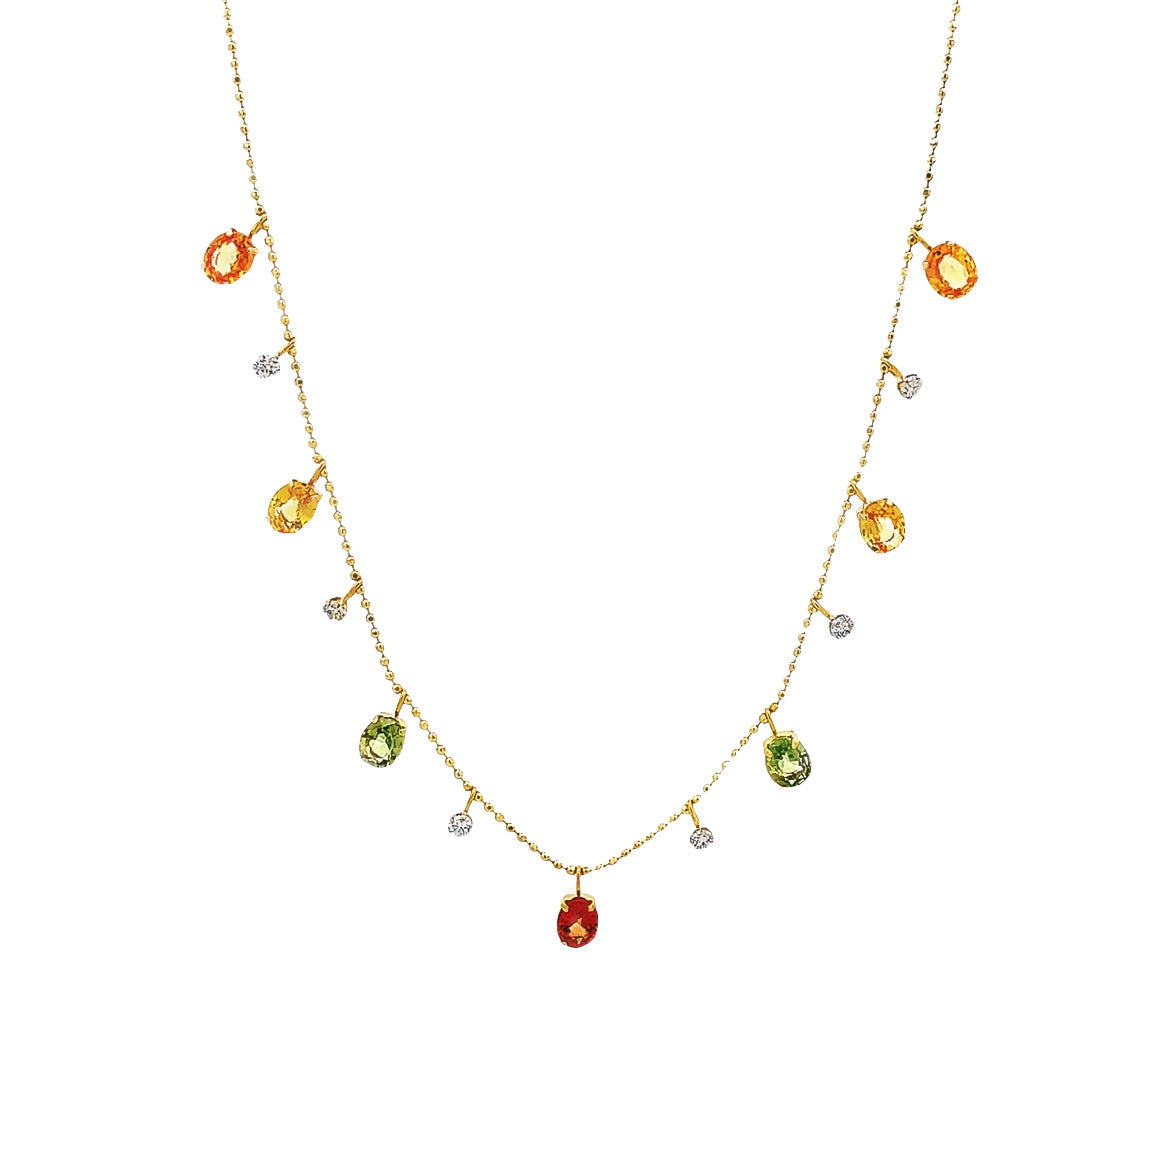 18K GOLD DIAMOND CHARMS NECKLACE WITH SAPPHIRES